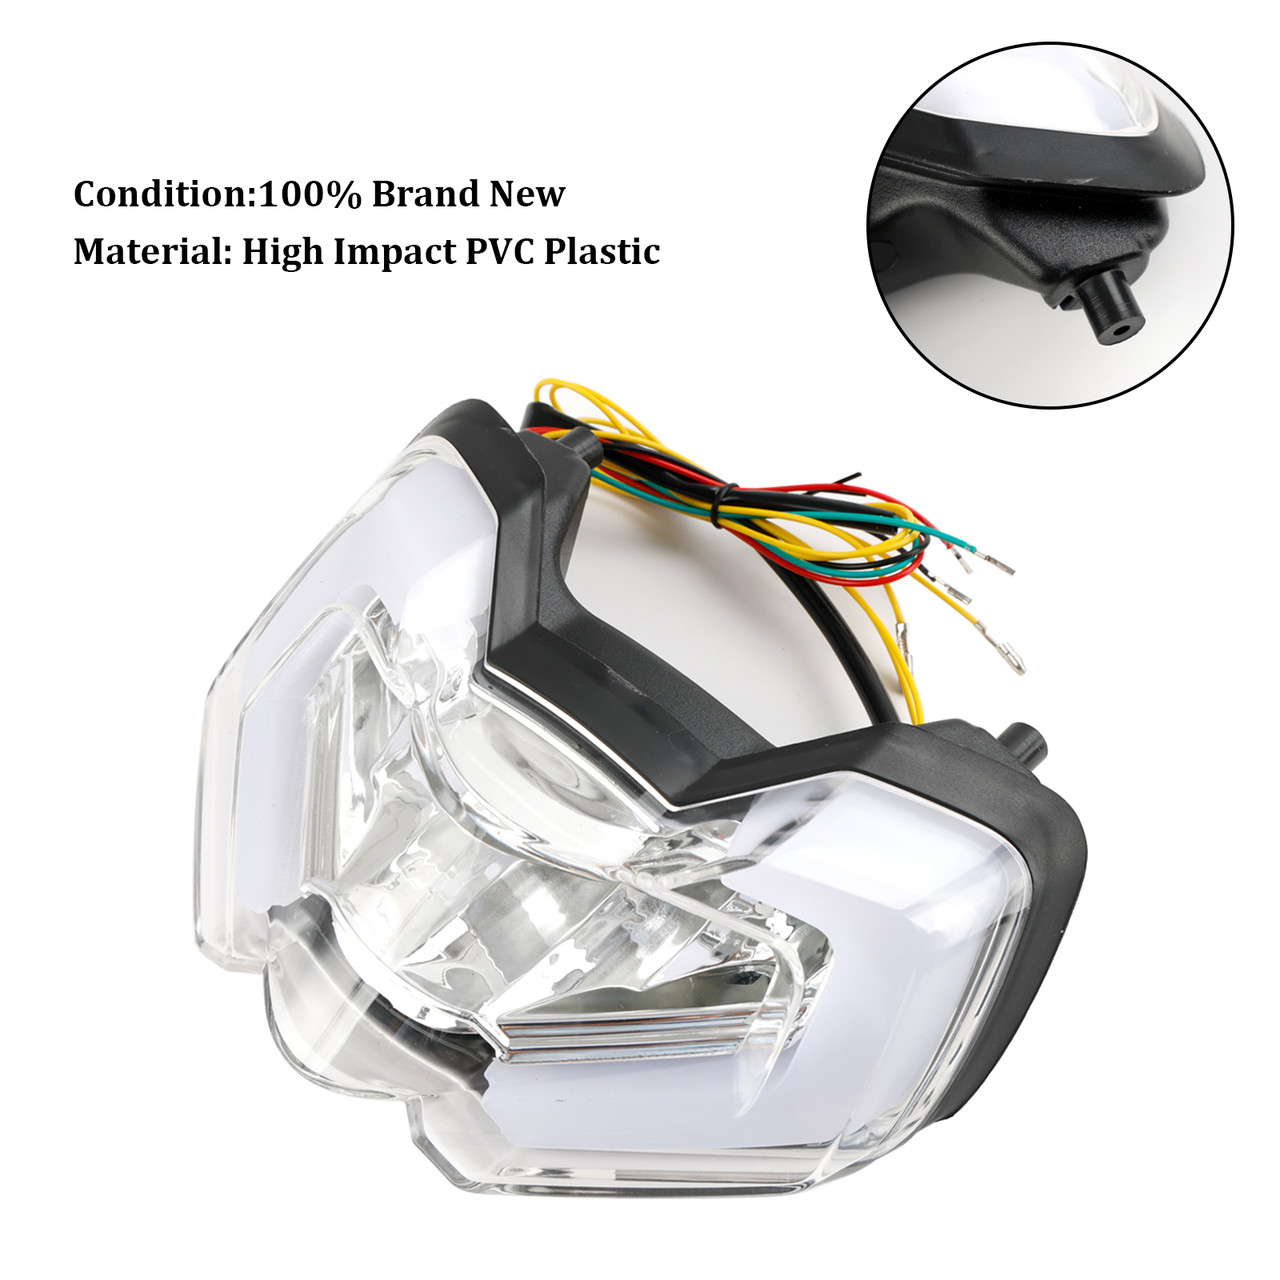 Tail Light Integrated Turn Signals For DUCATI Multistrada V4S V4 110 21-23 Clear